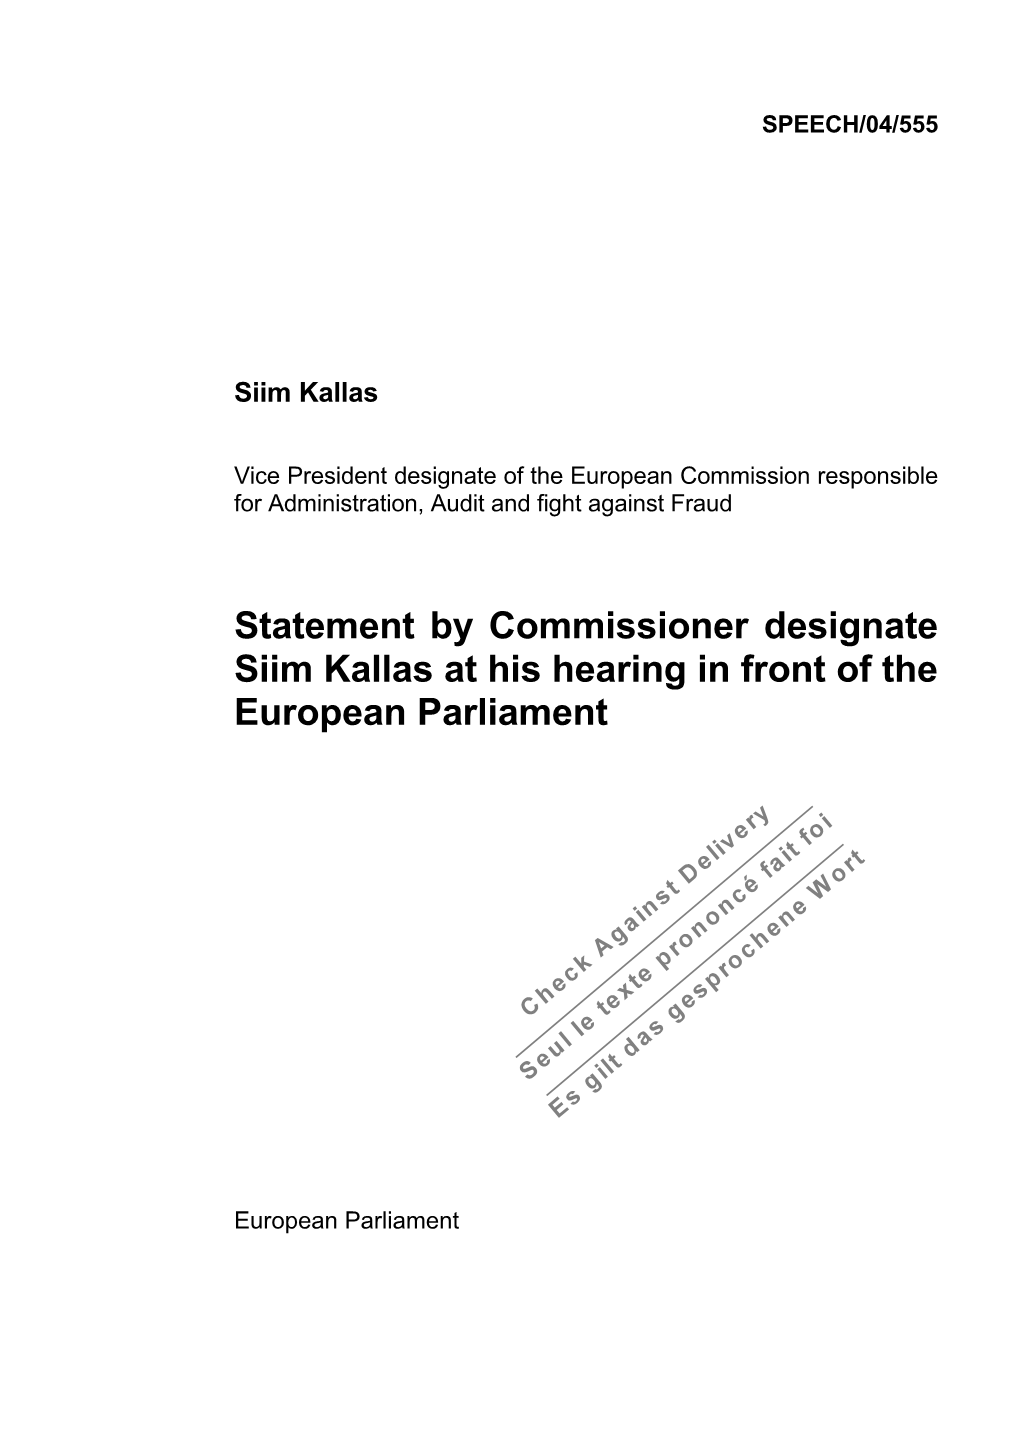 Statement by Commissioner Designate Siim Kallas at His Hearing in Front of the European